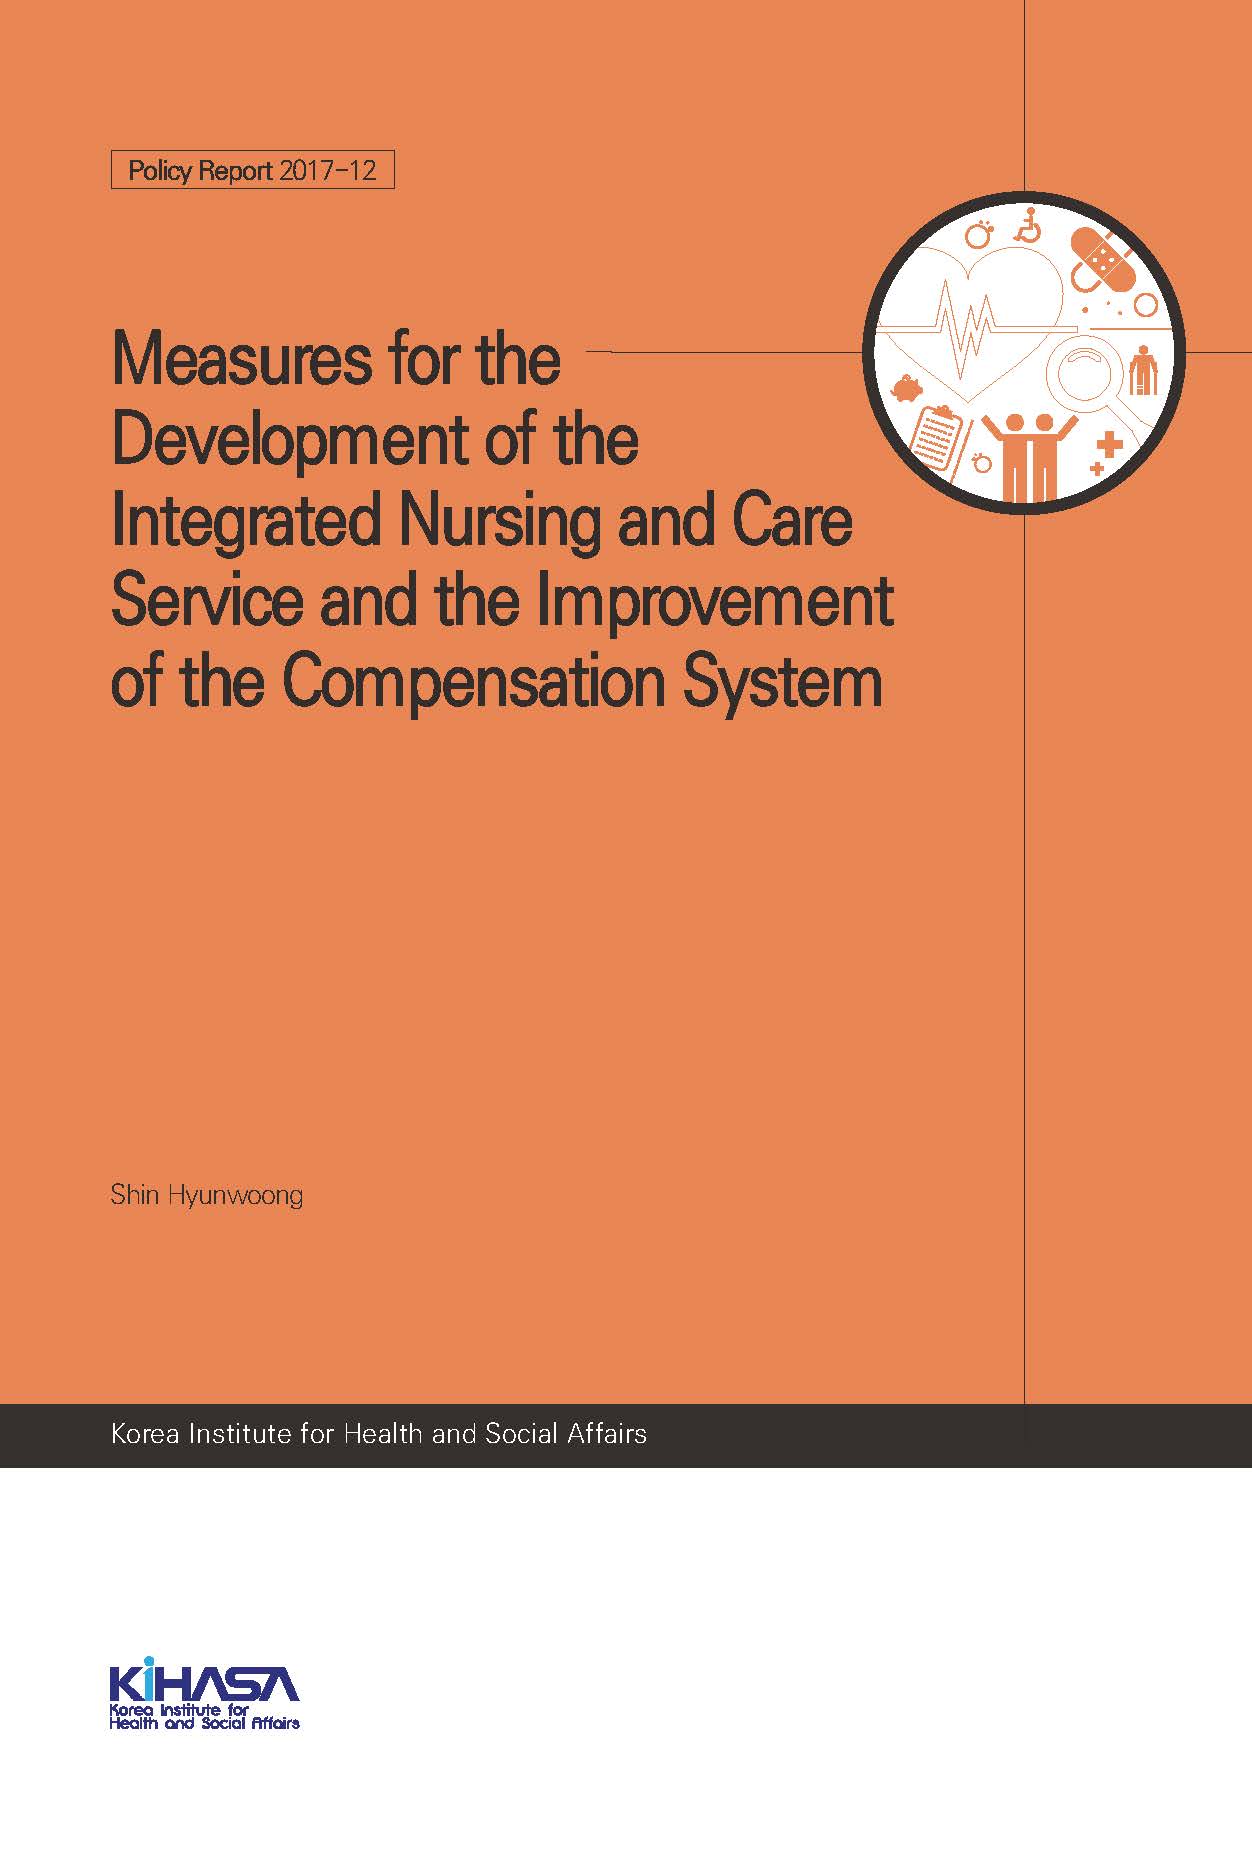 Measures for the Development of the Integrated Nursing and Care Service and the Improvement of the Compensation System